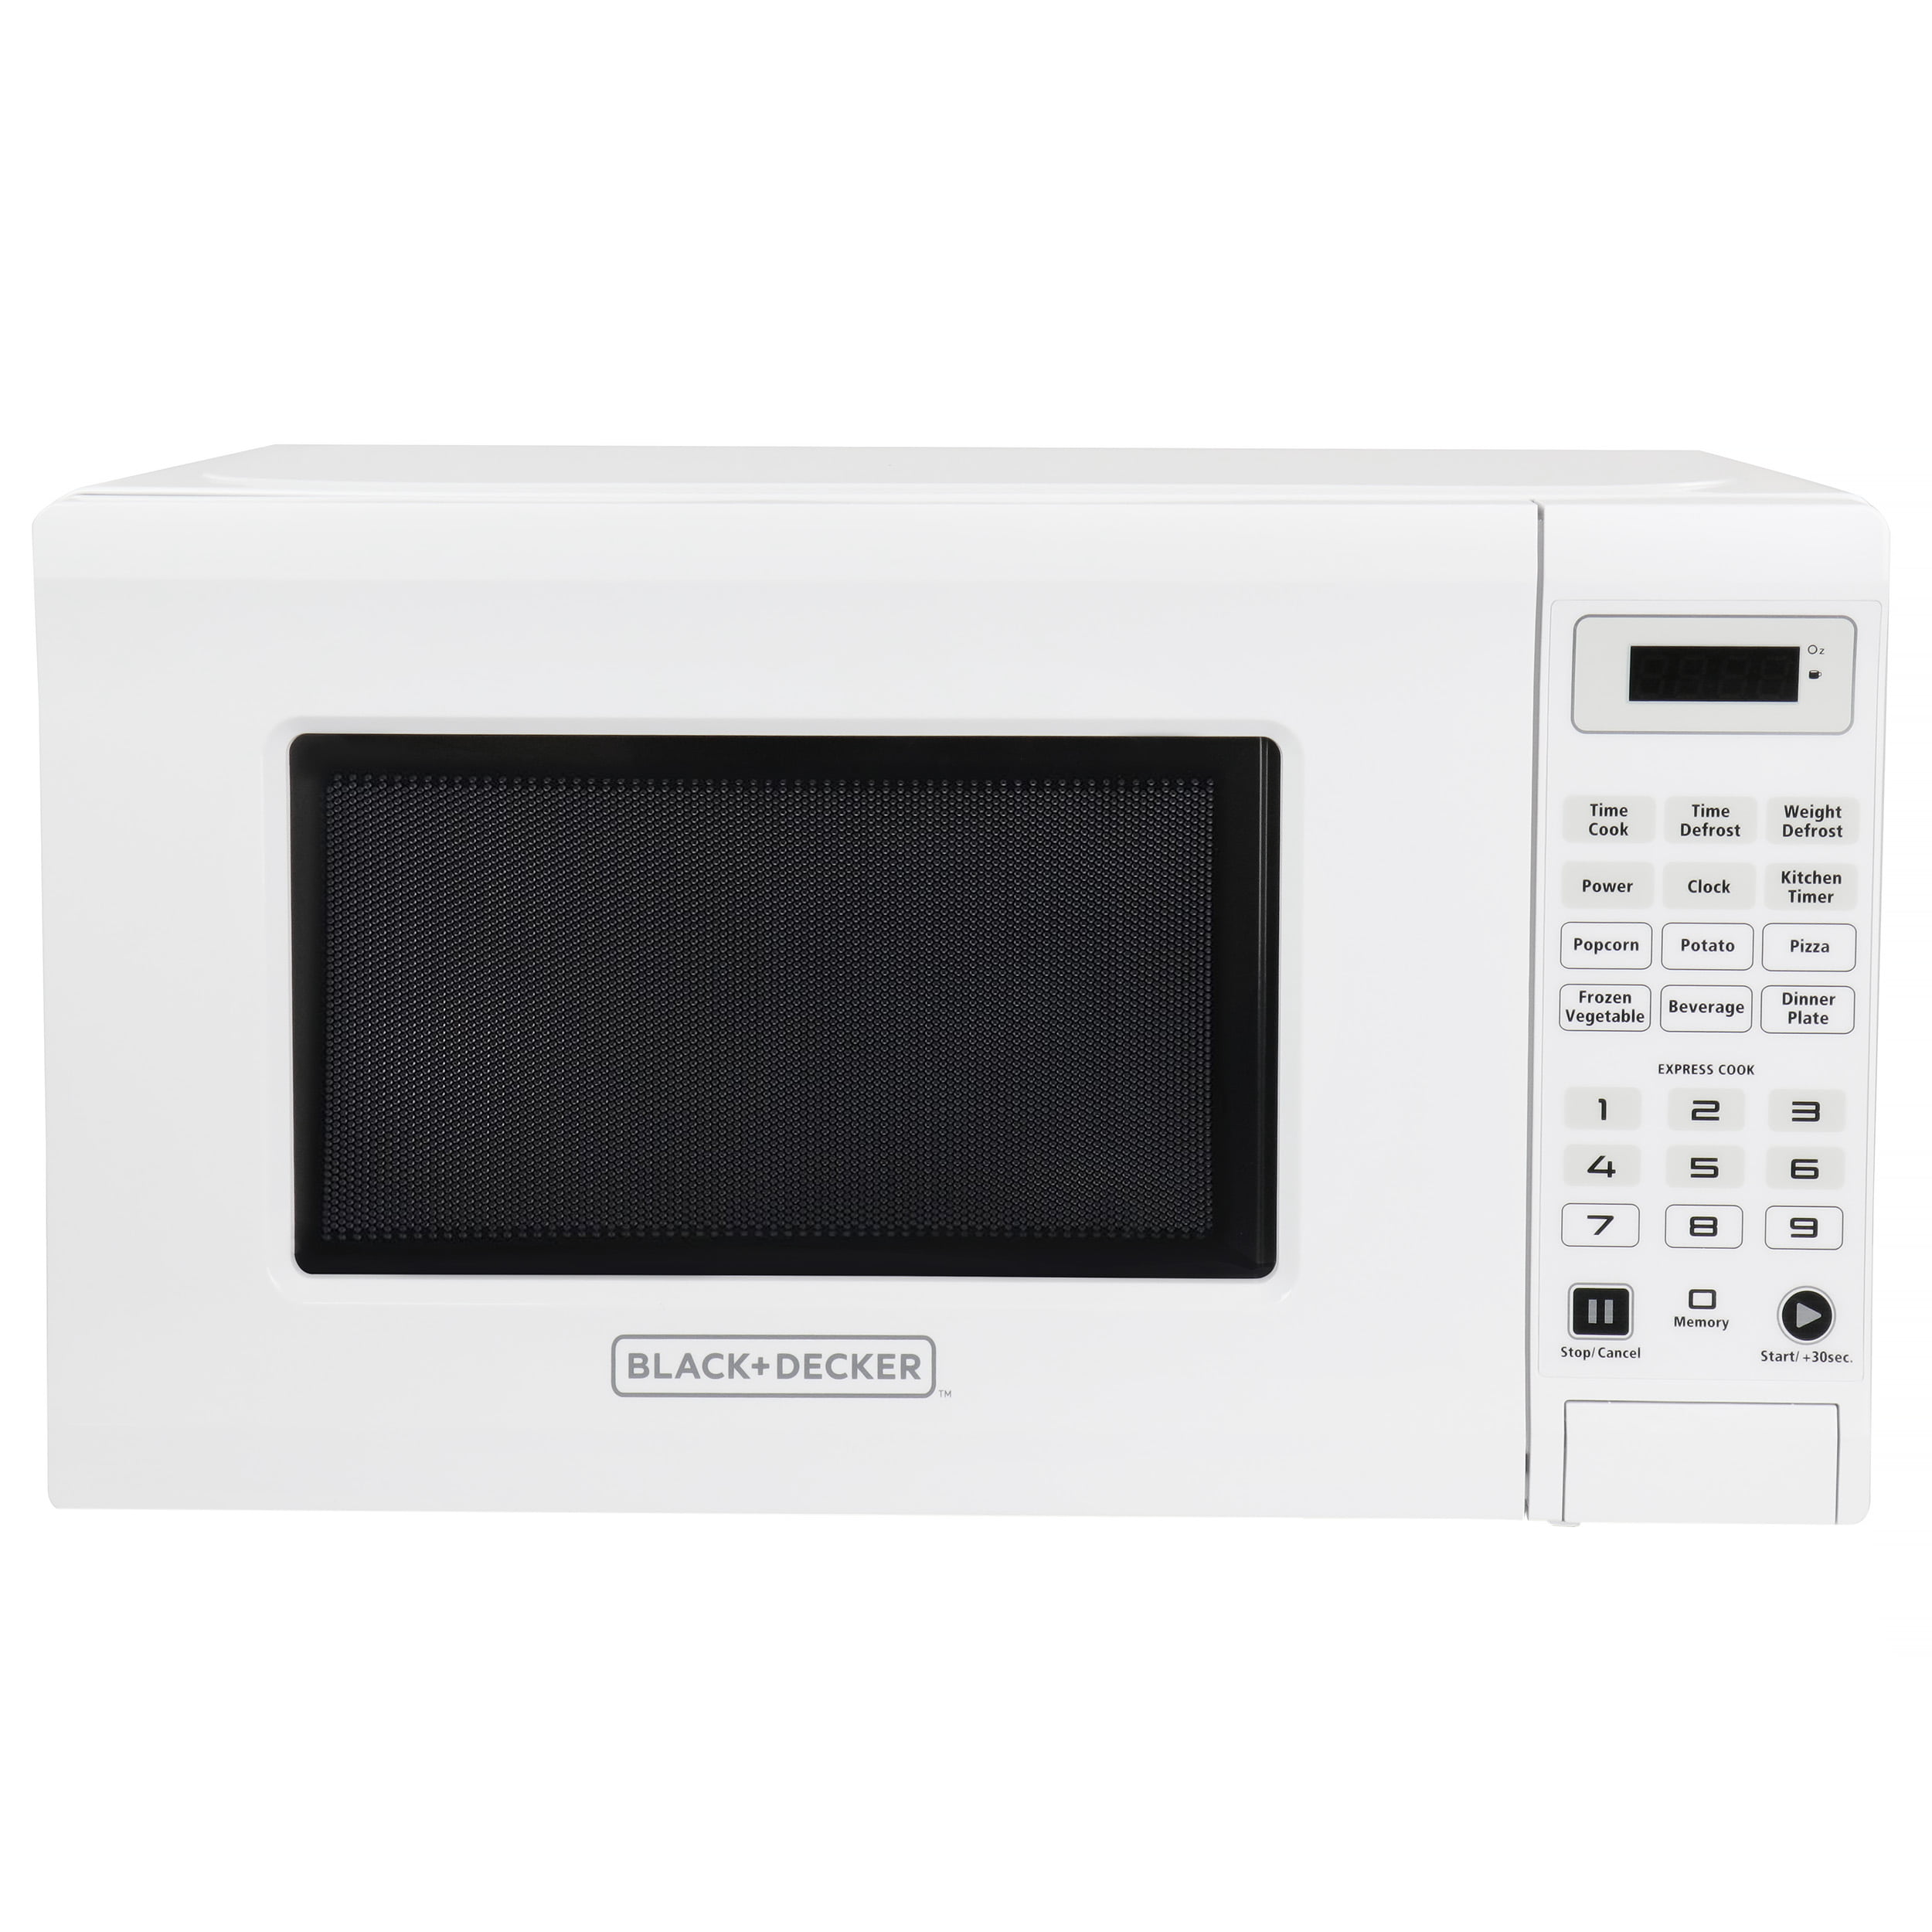 West Bend 0.7 Cu. Ft. 700W Compact Kitchen Countertop Microwave Oven